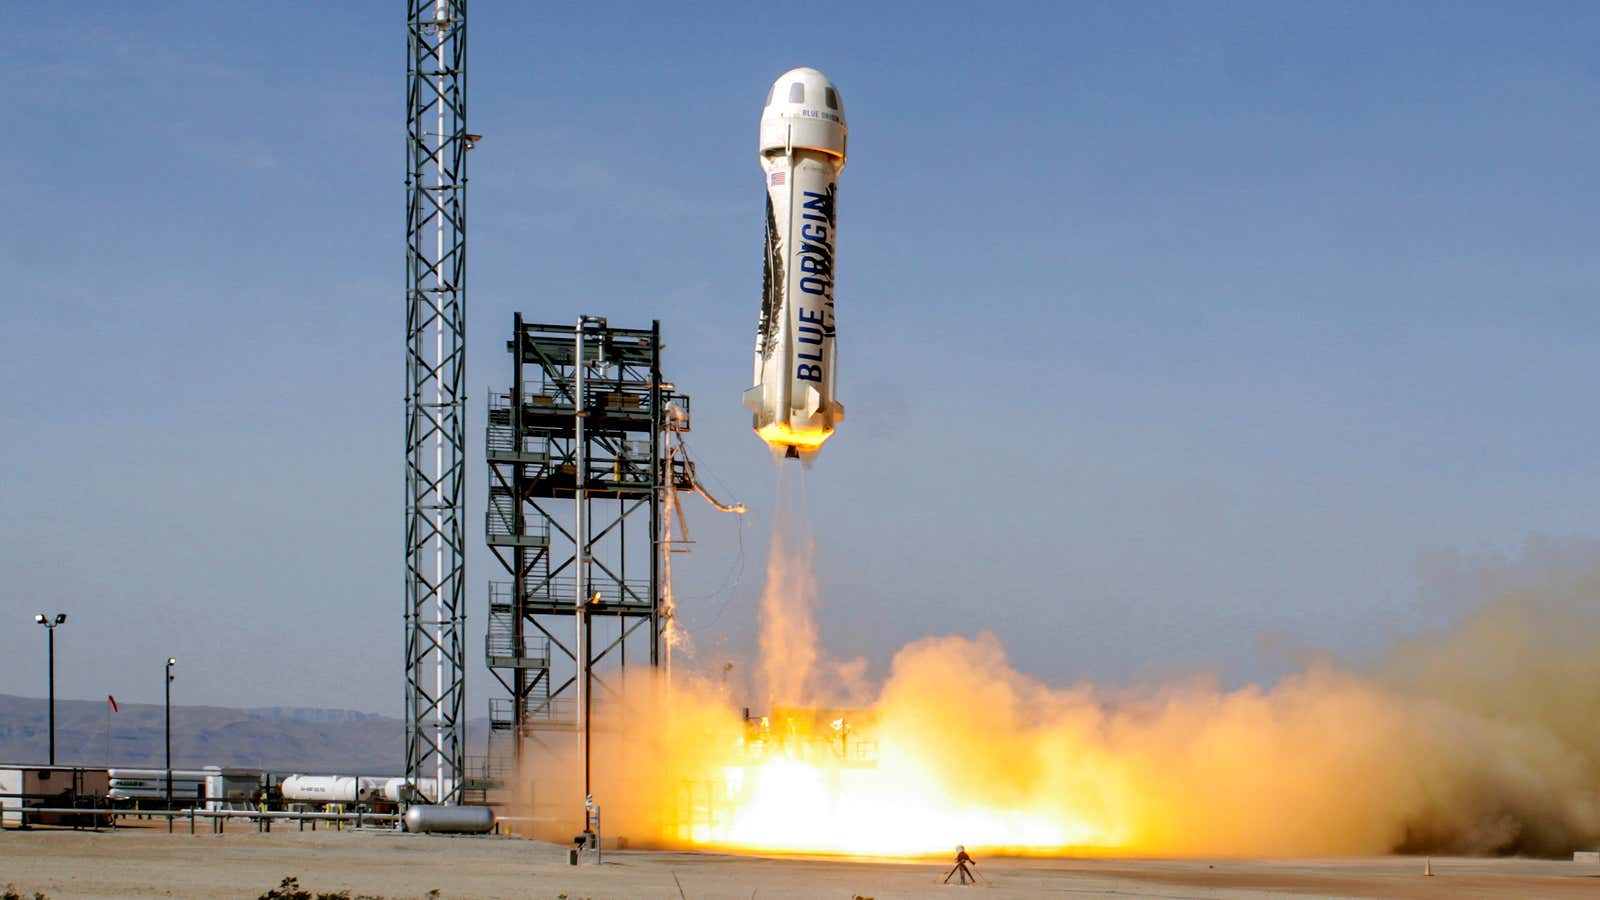 We’re going to need a bigger rocket.